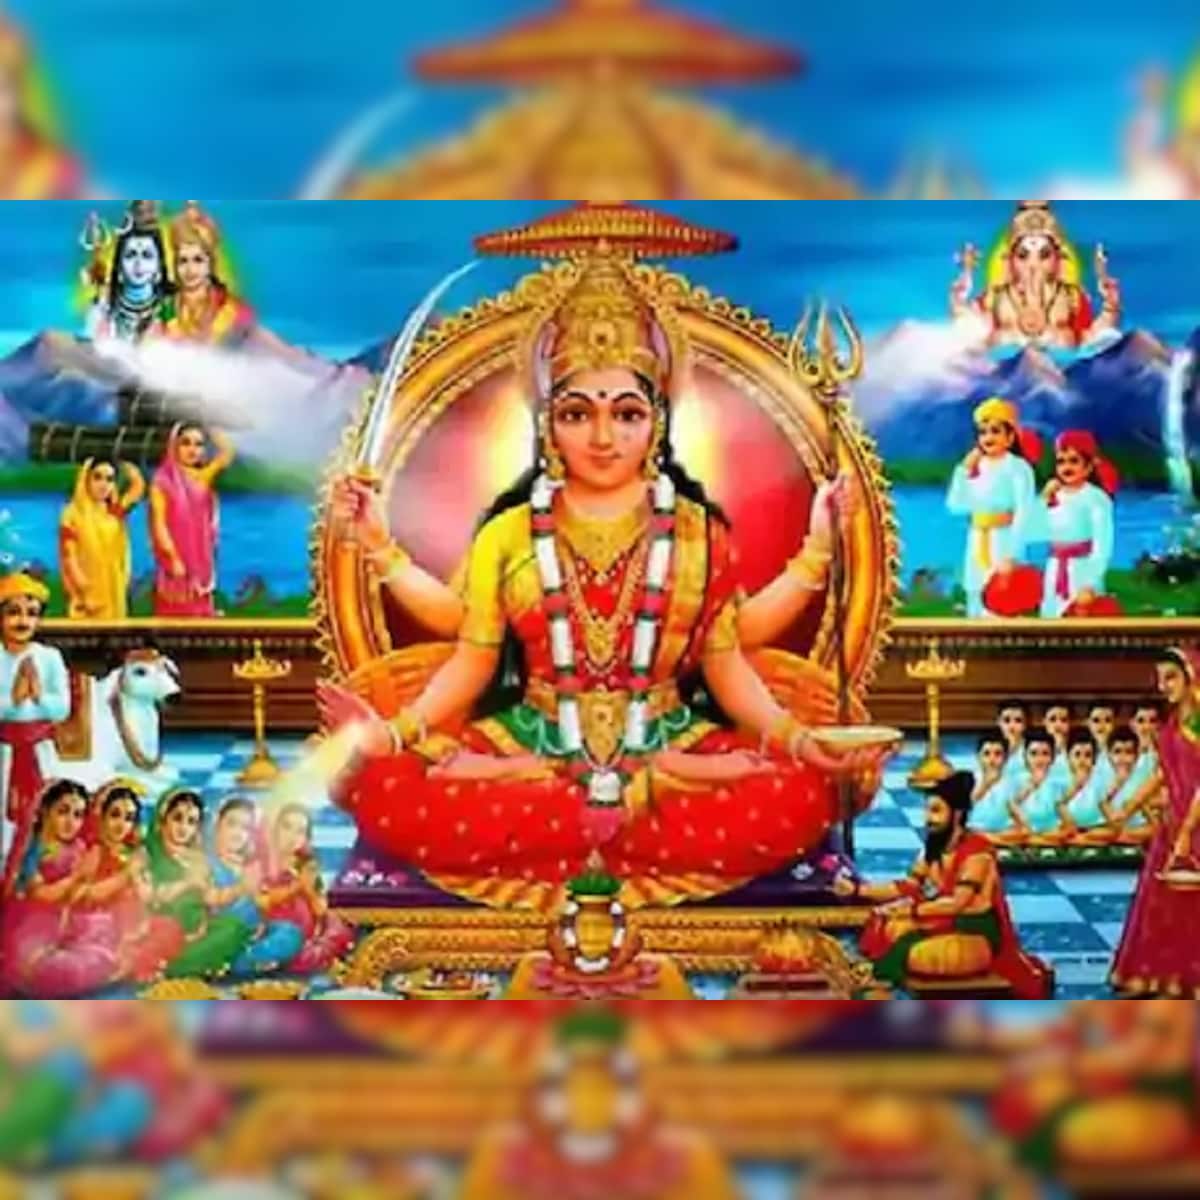 Outstanding Compilation of Over 999 Santoshi Mata Pictures in Full 4K Quality